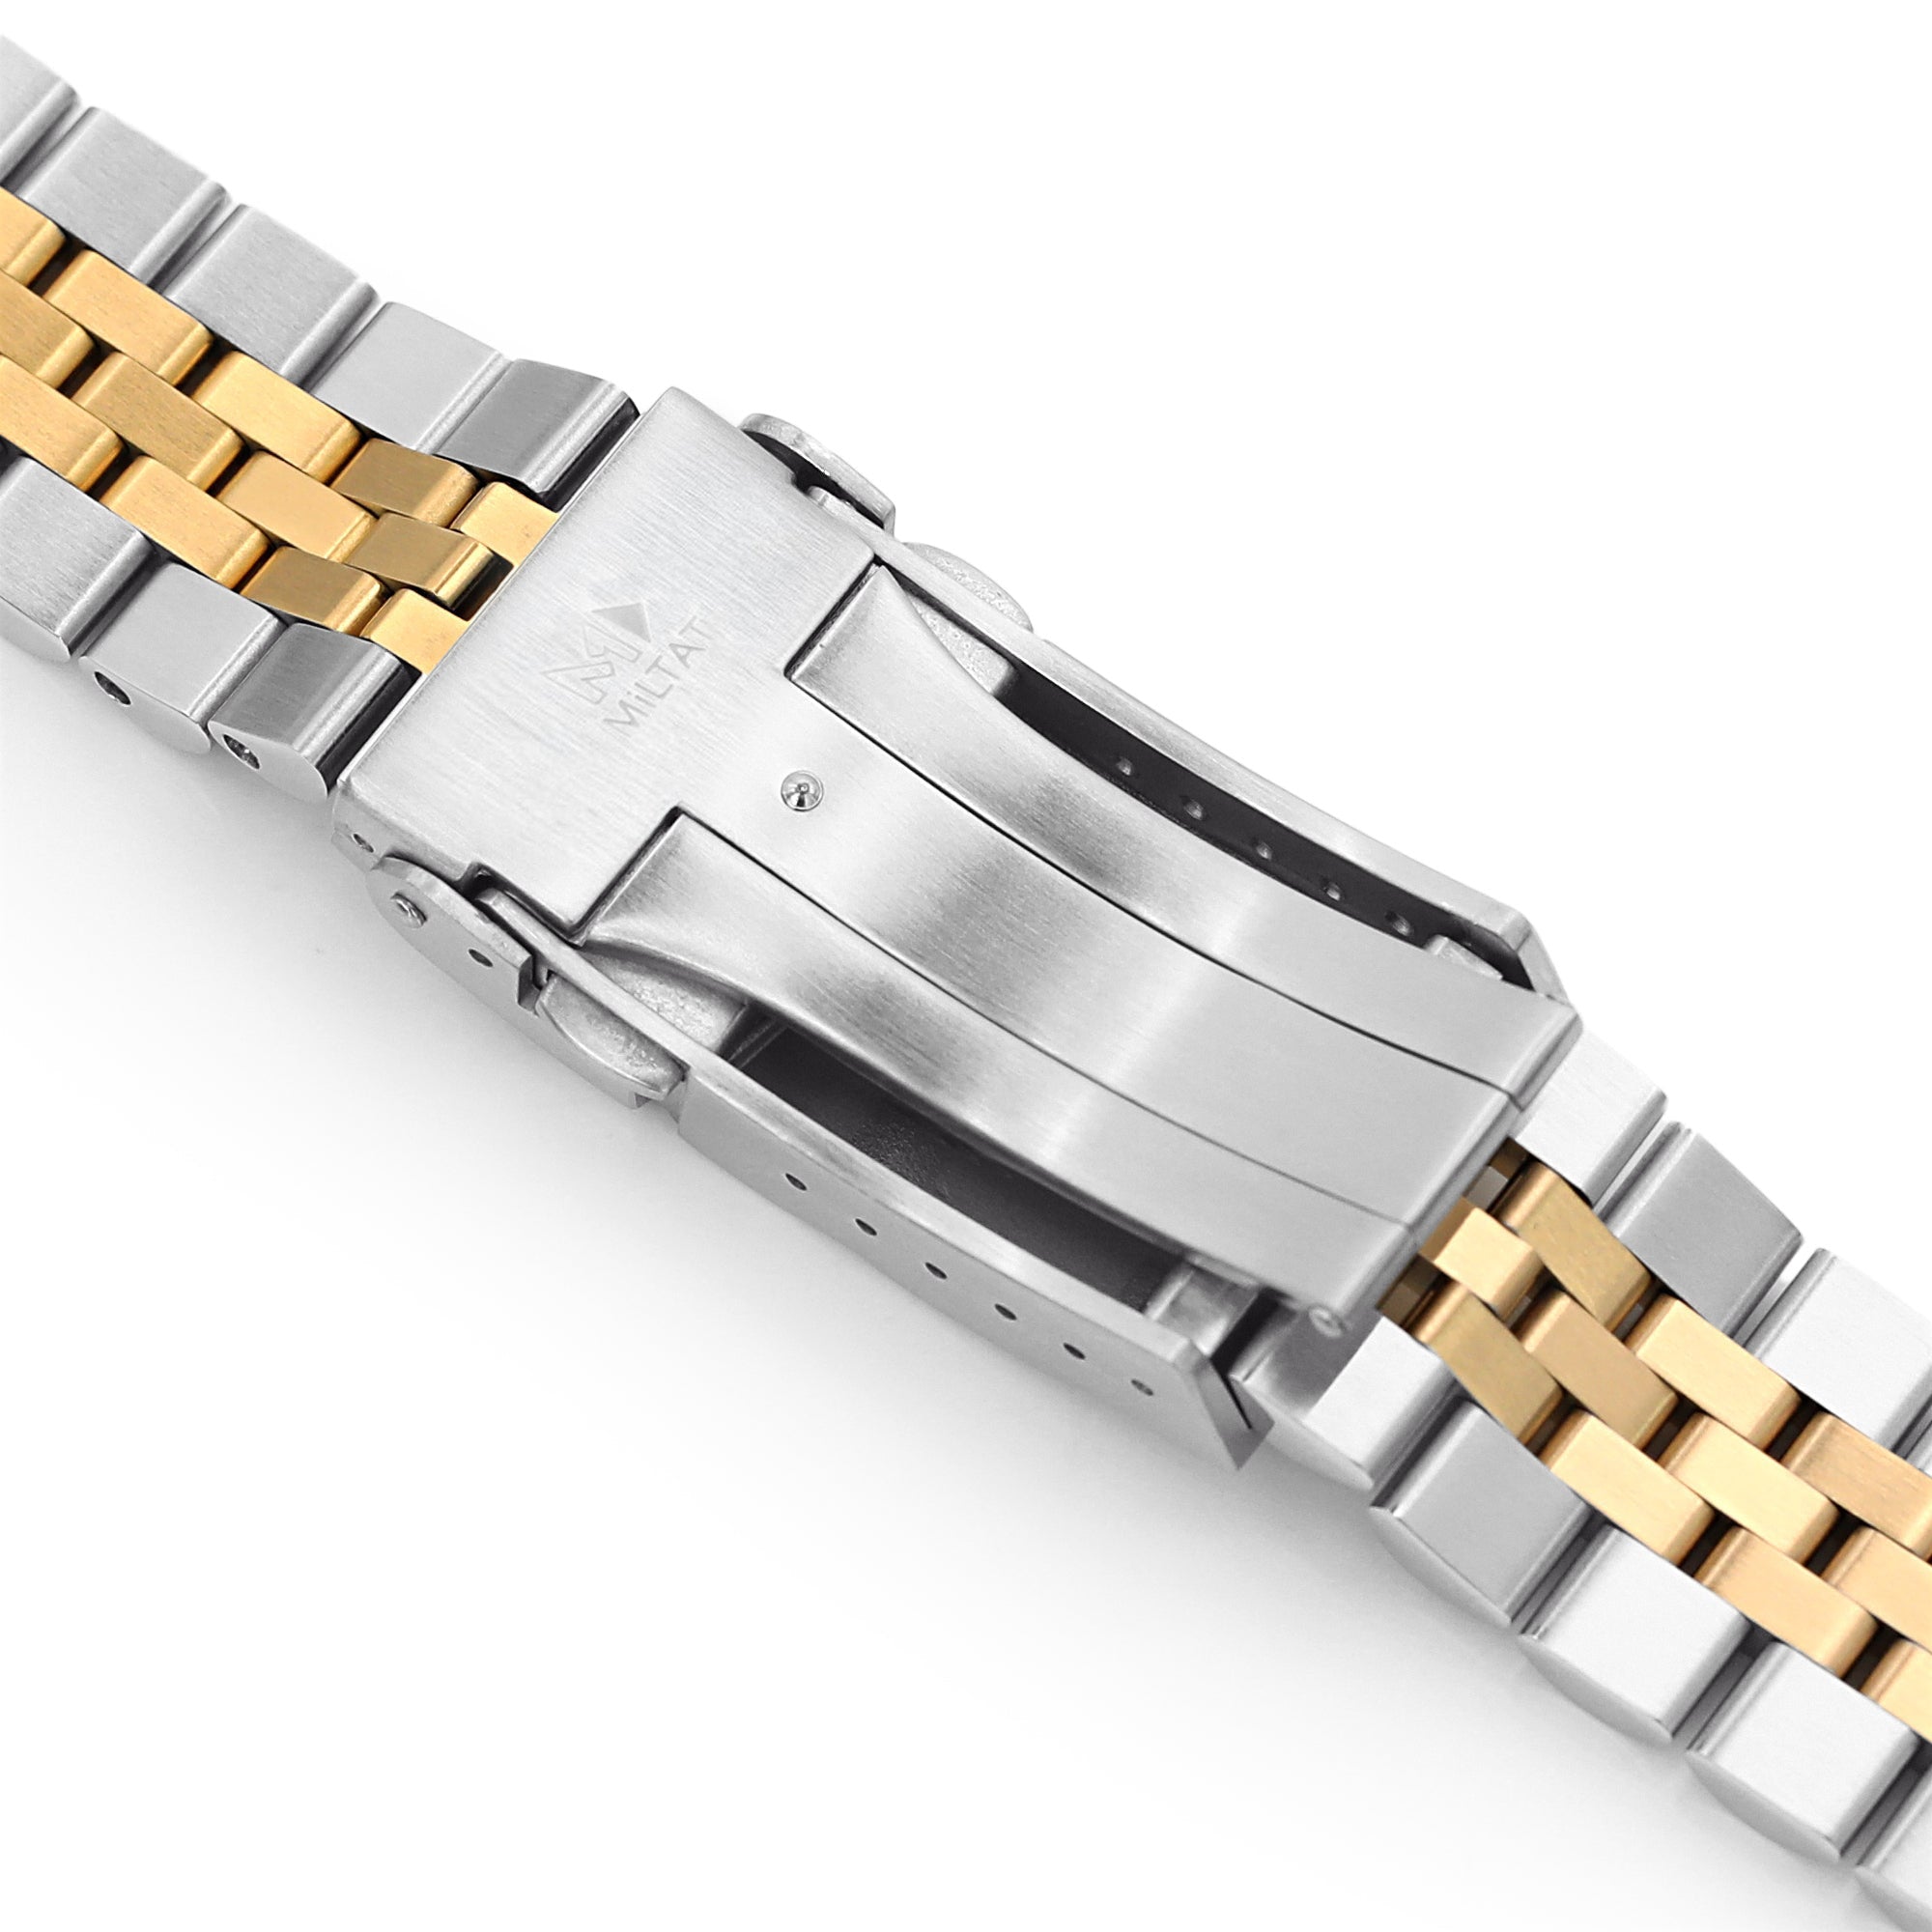 22mm Super-J Louis JUB Watch Band compatible with Seiko SKX007, 316L Stainless Steel Two Tone IP Gold with 2T SUB Clasp